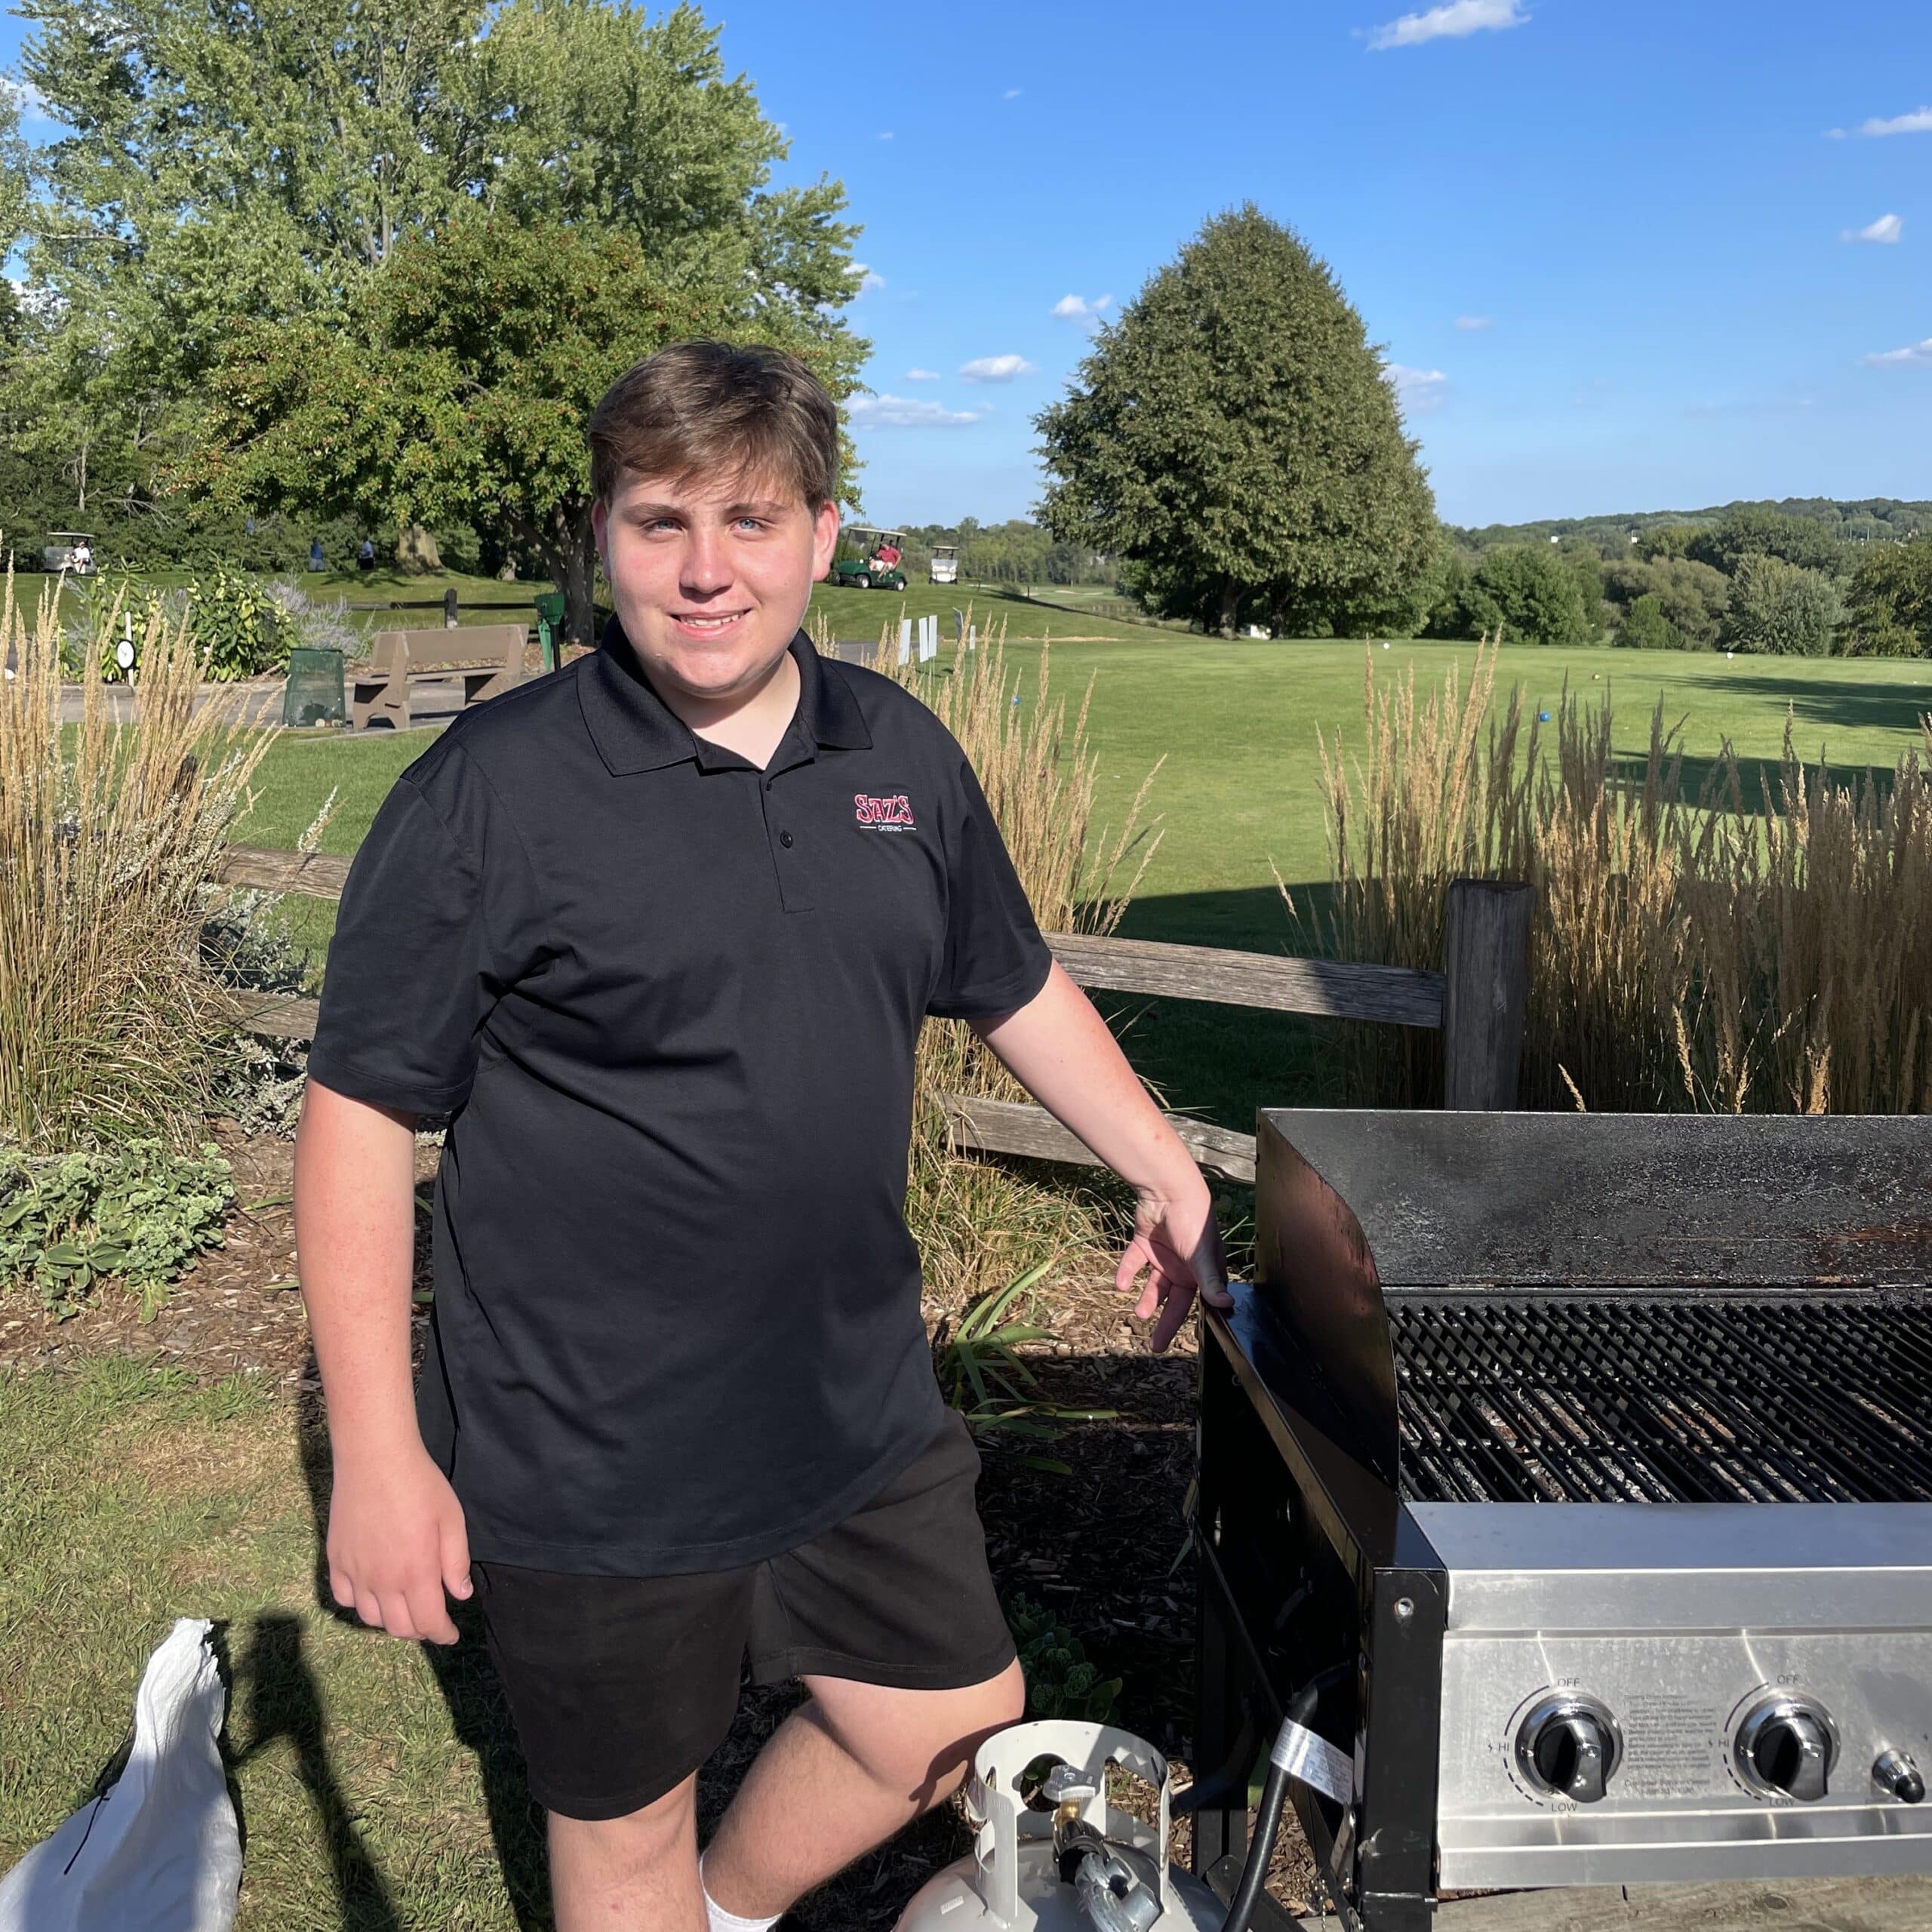 Catering Server with grill outdoors